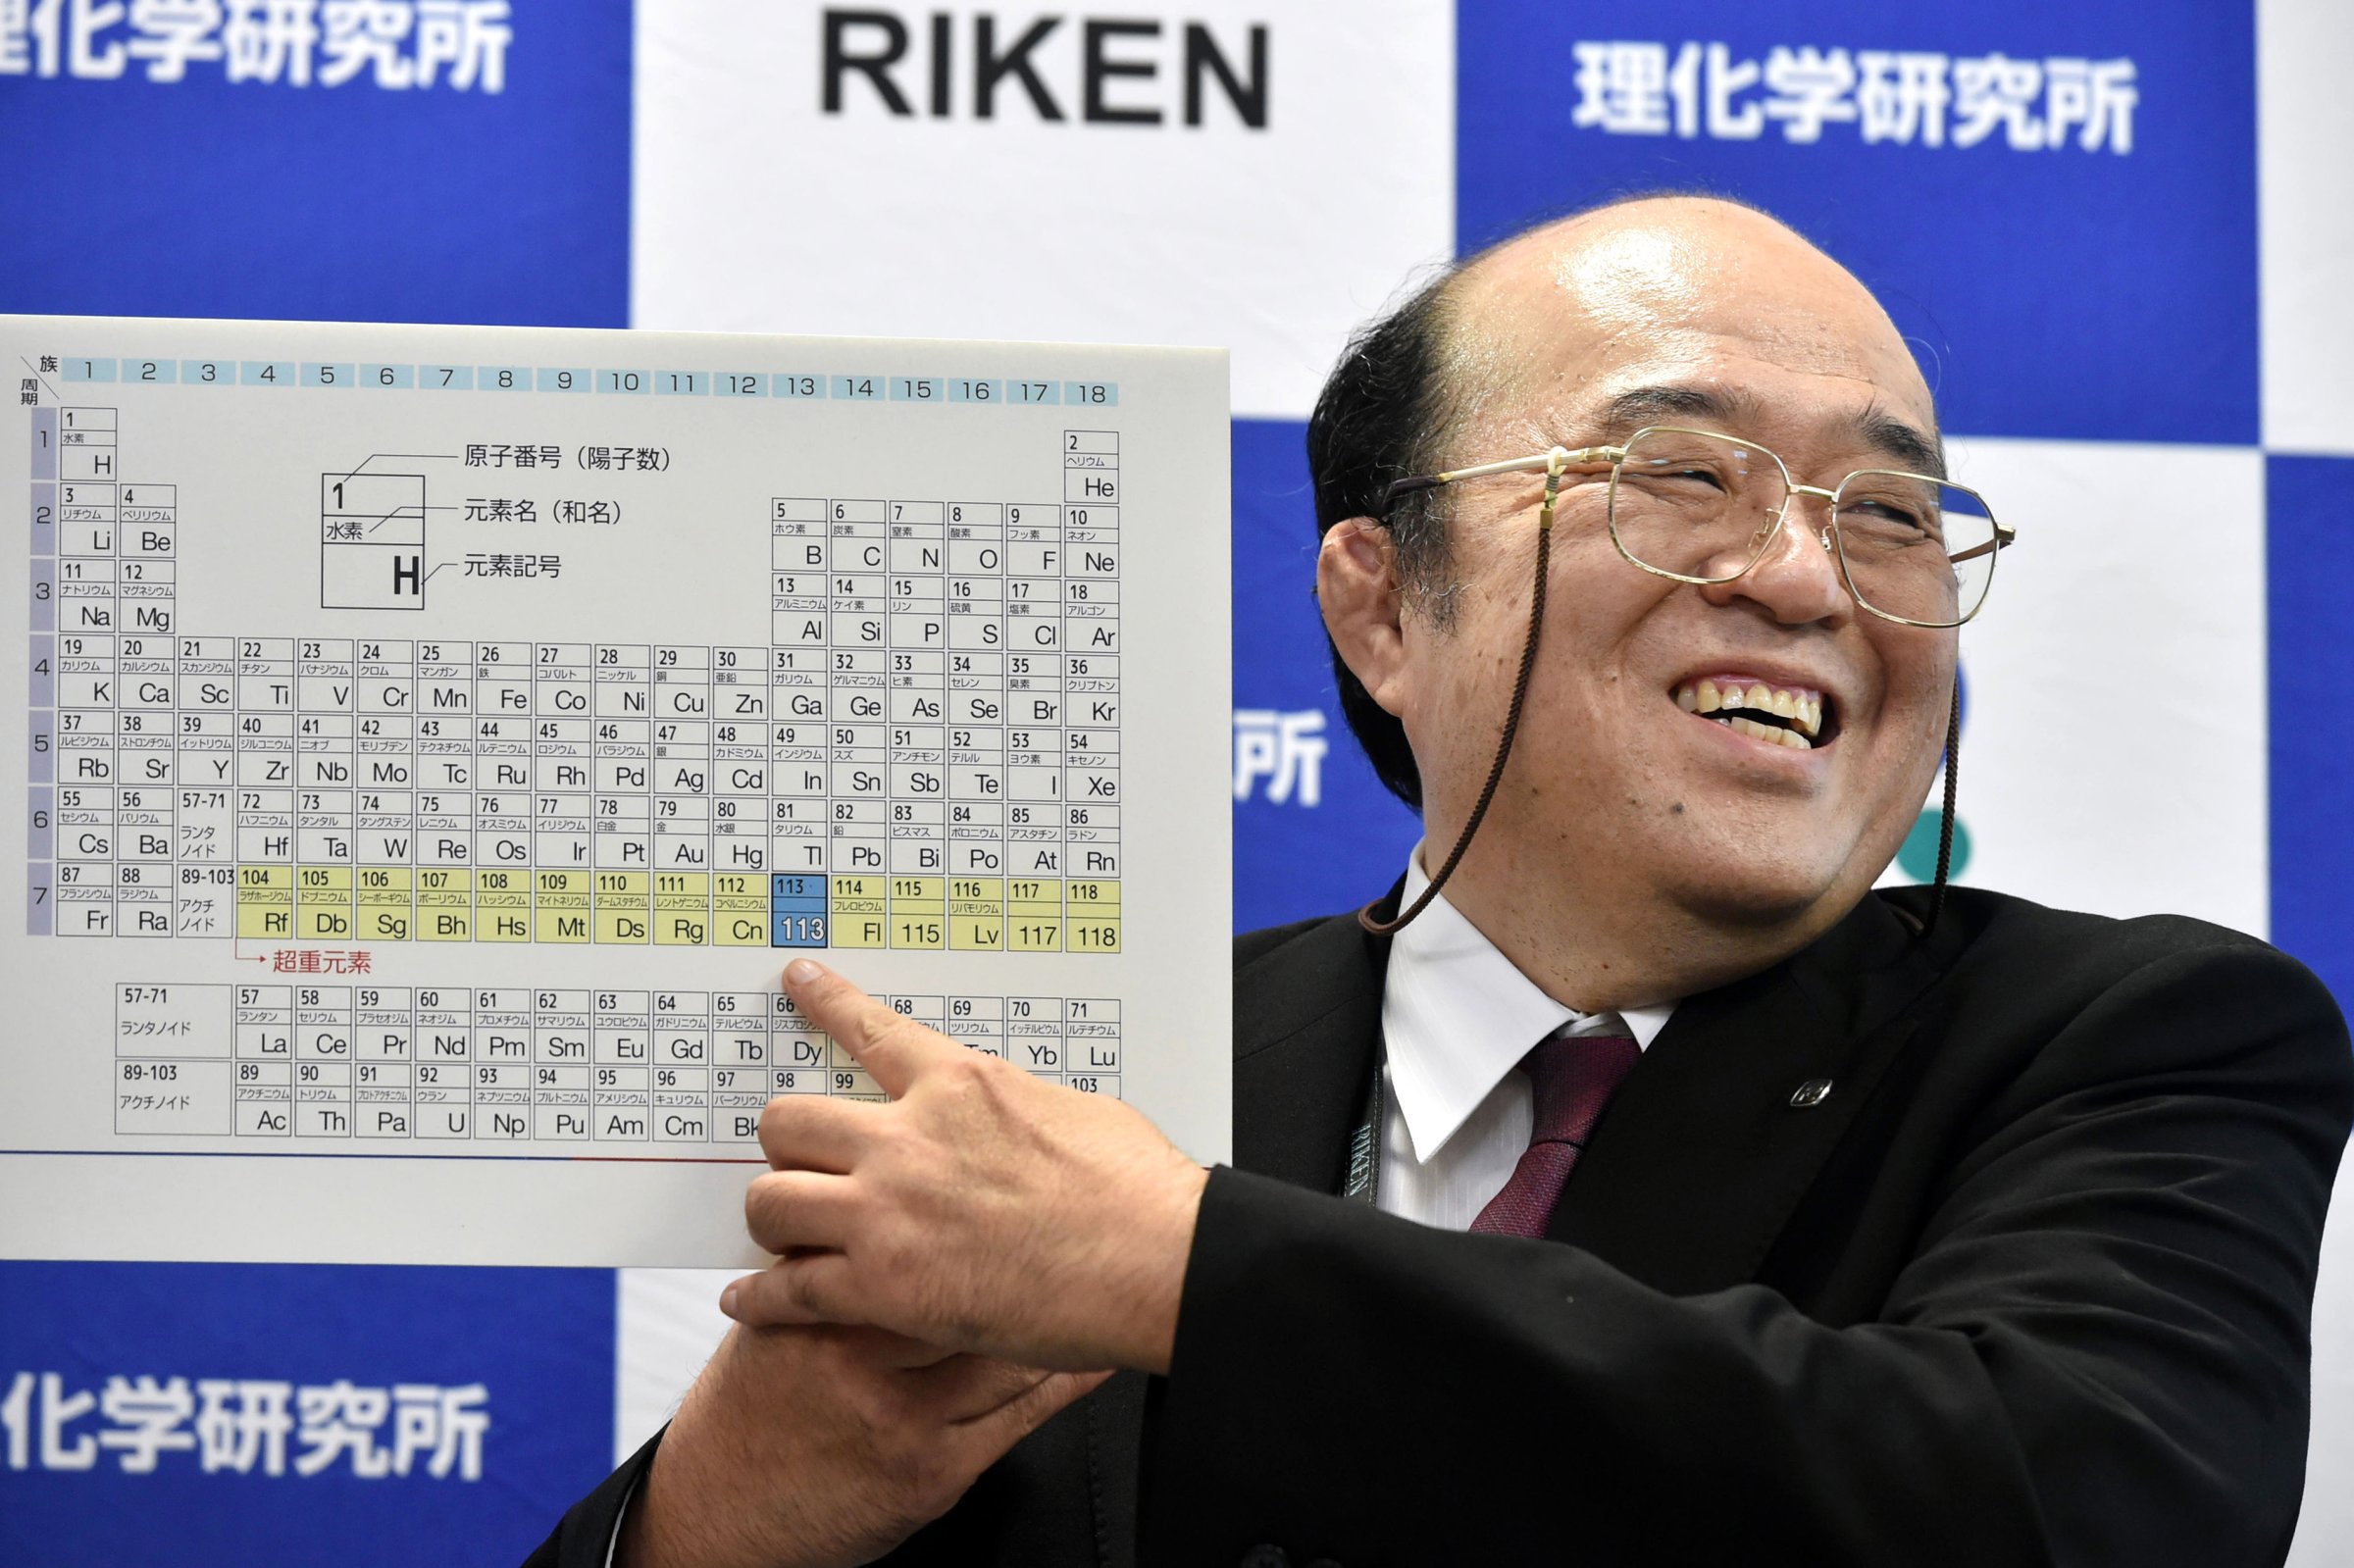 Kosuke Morita, who has led RIKEN group at the Riken institute, shows the 113 atomic element number at a news conference at the institute in Wako, Saitama Prefecture on Dec. 31, 2015.